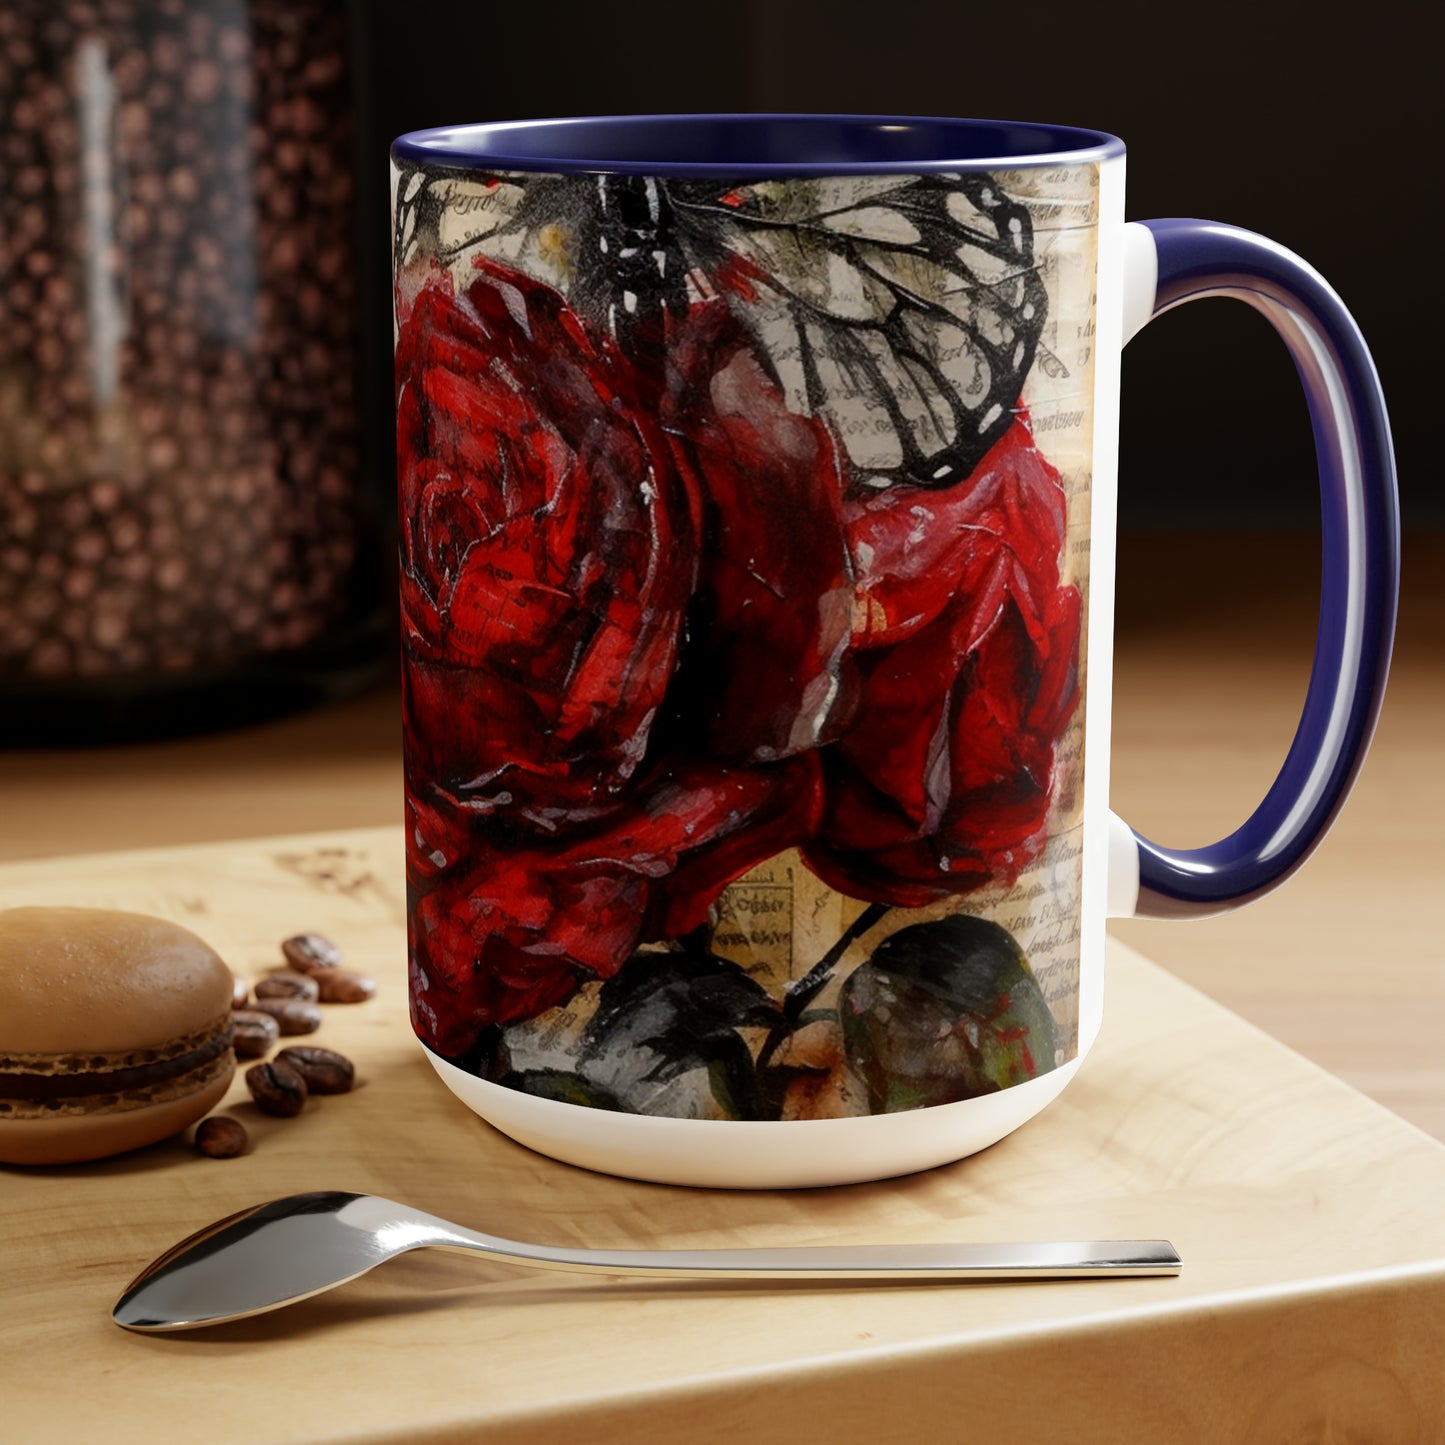 Two-Tone Coffee Mugs, 15oz, Red Rose with Butterfly - royal blue rim